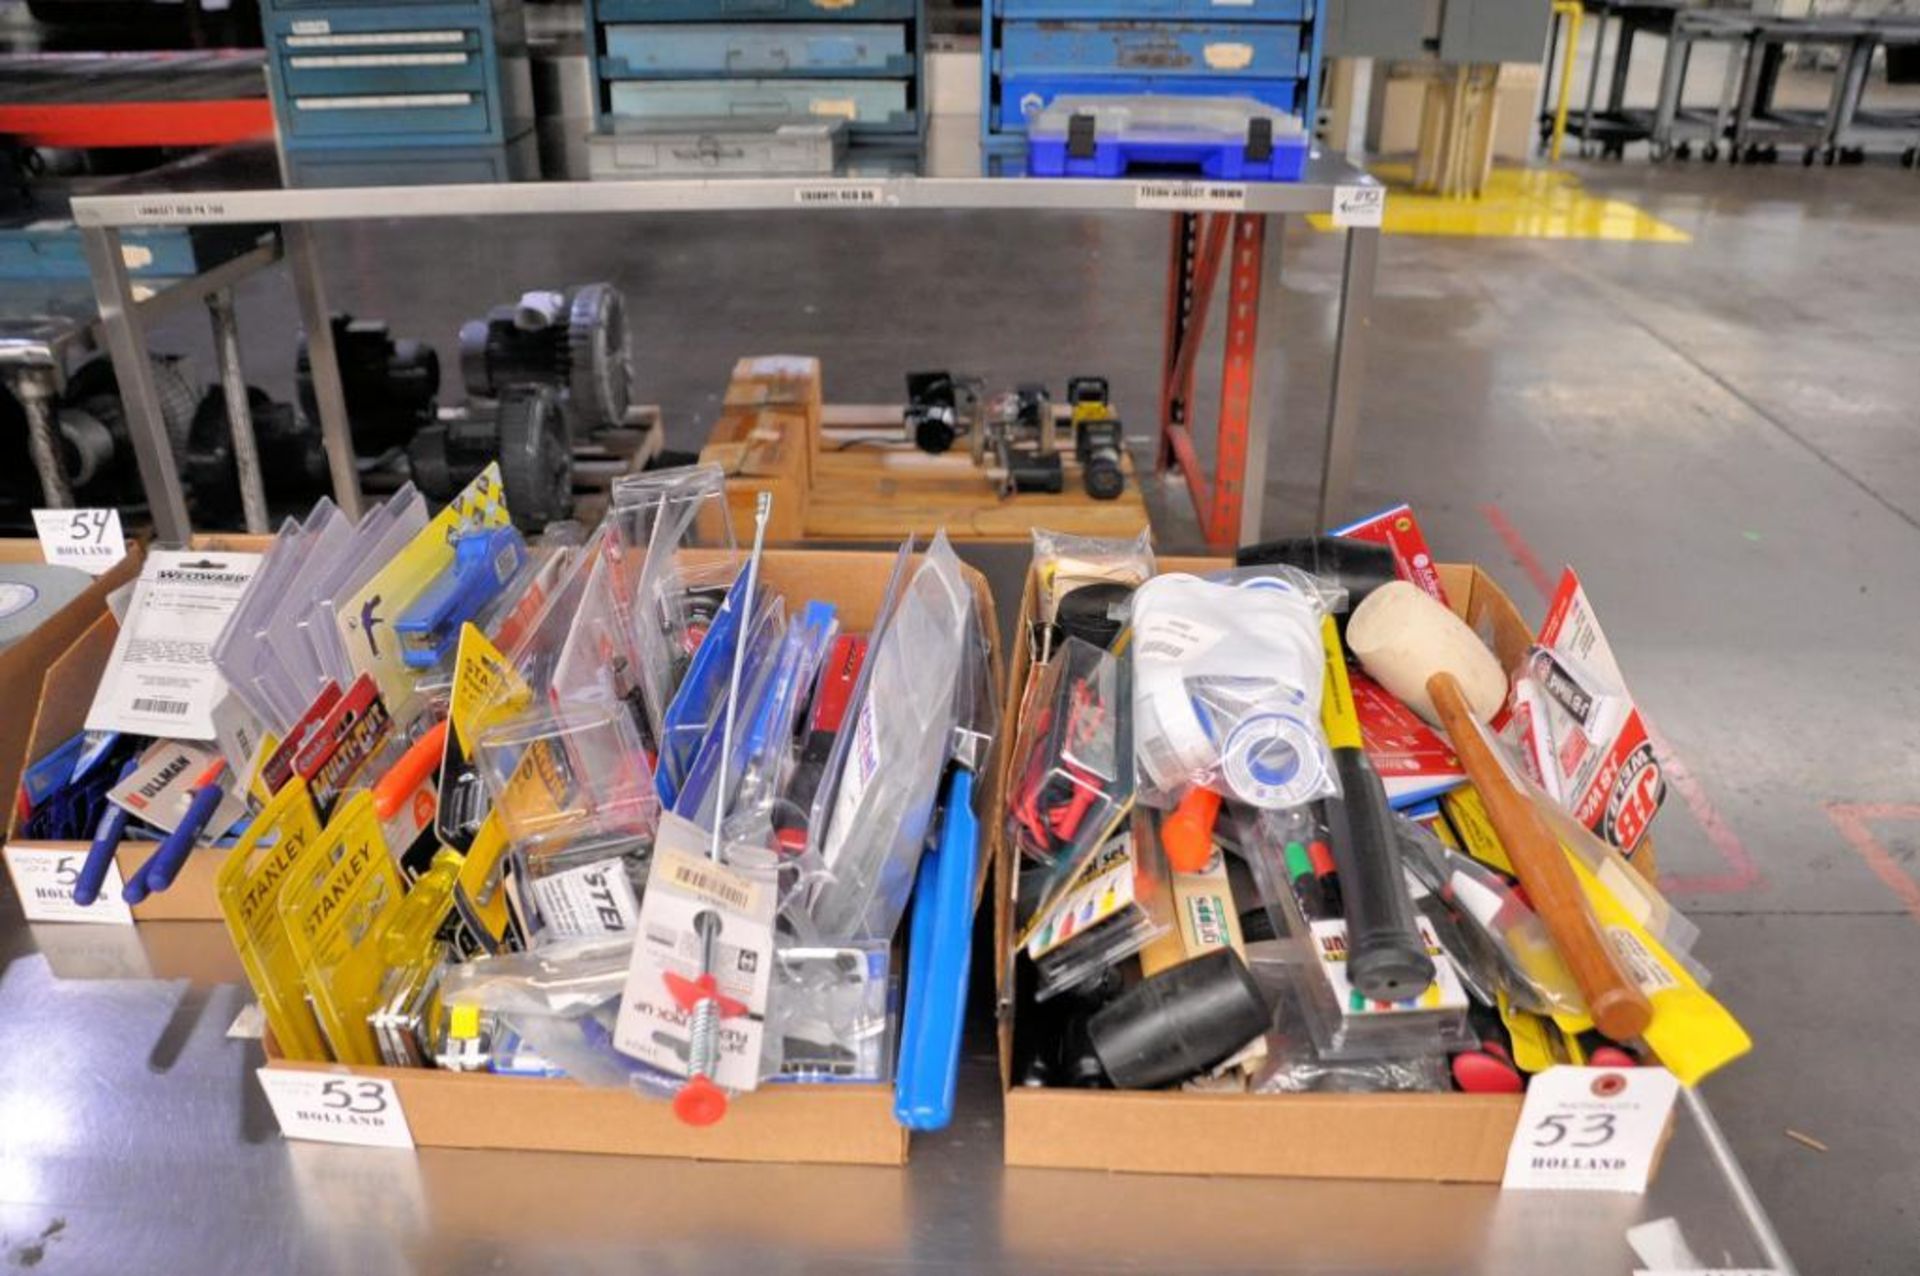 Lot - Mallots, Tweezers, Putty Knives, Utility Blades, Channel Locks, Tape Measures, Pliers